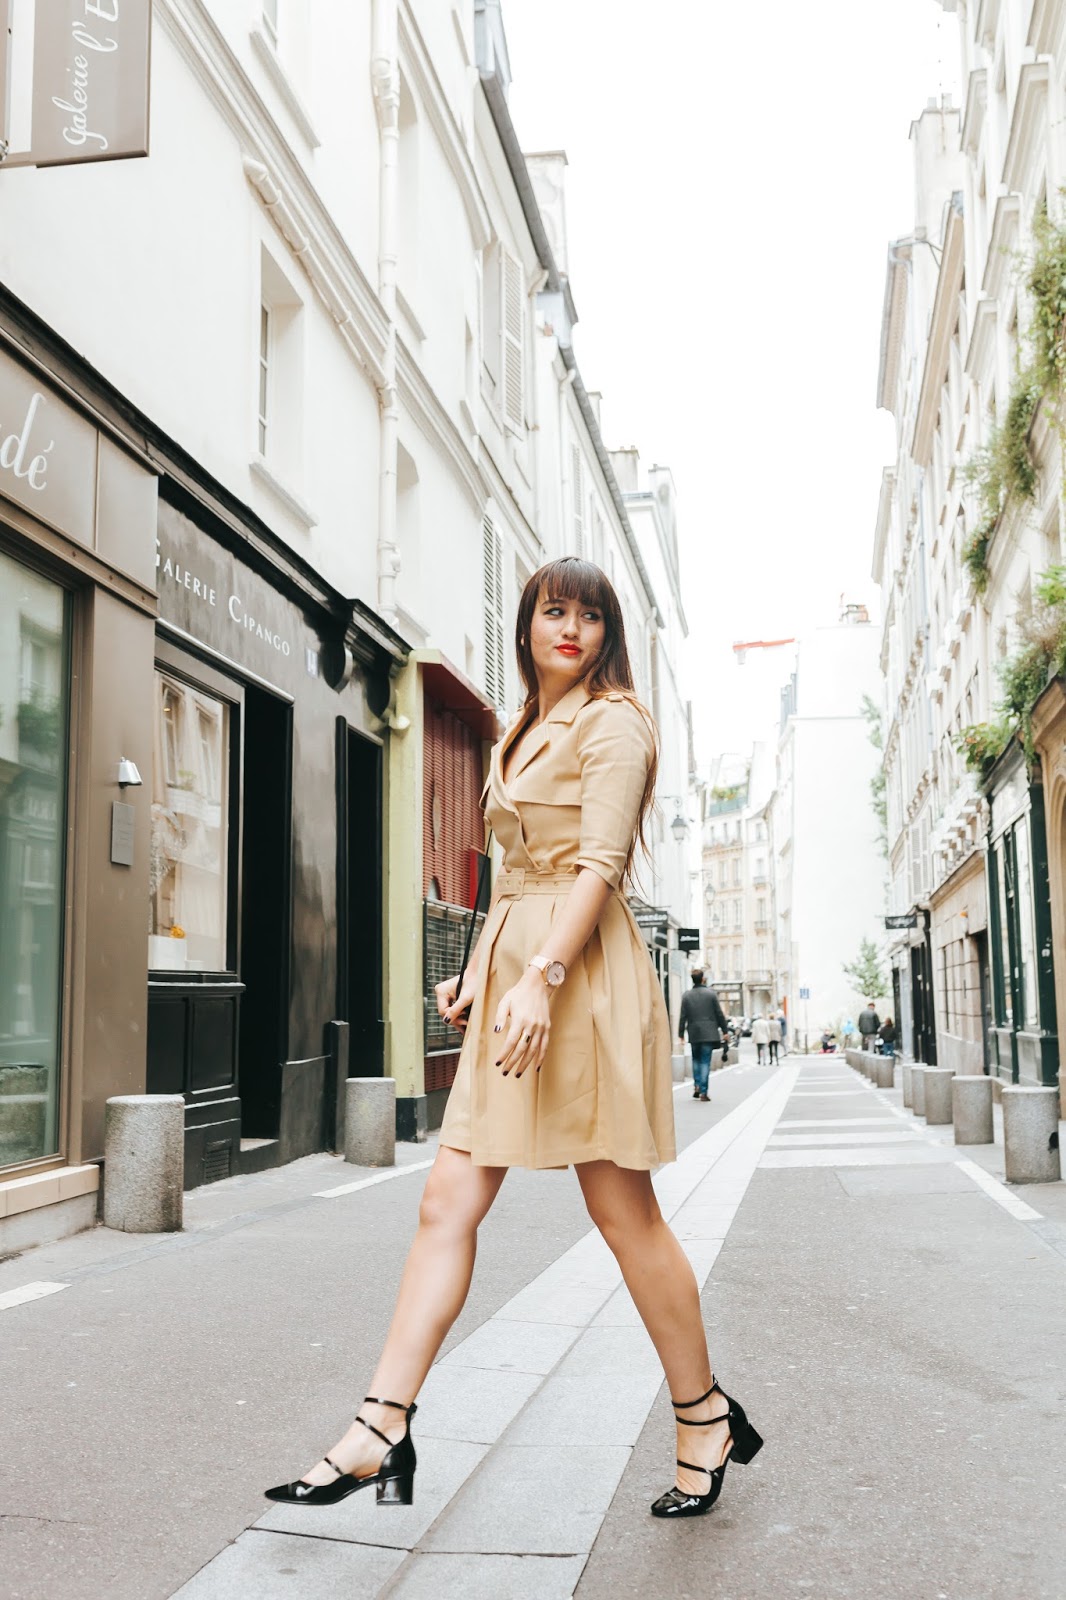 parisian fashion blogger, look, style, mode, chic, trench dress, chic wish, meetmeinparee